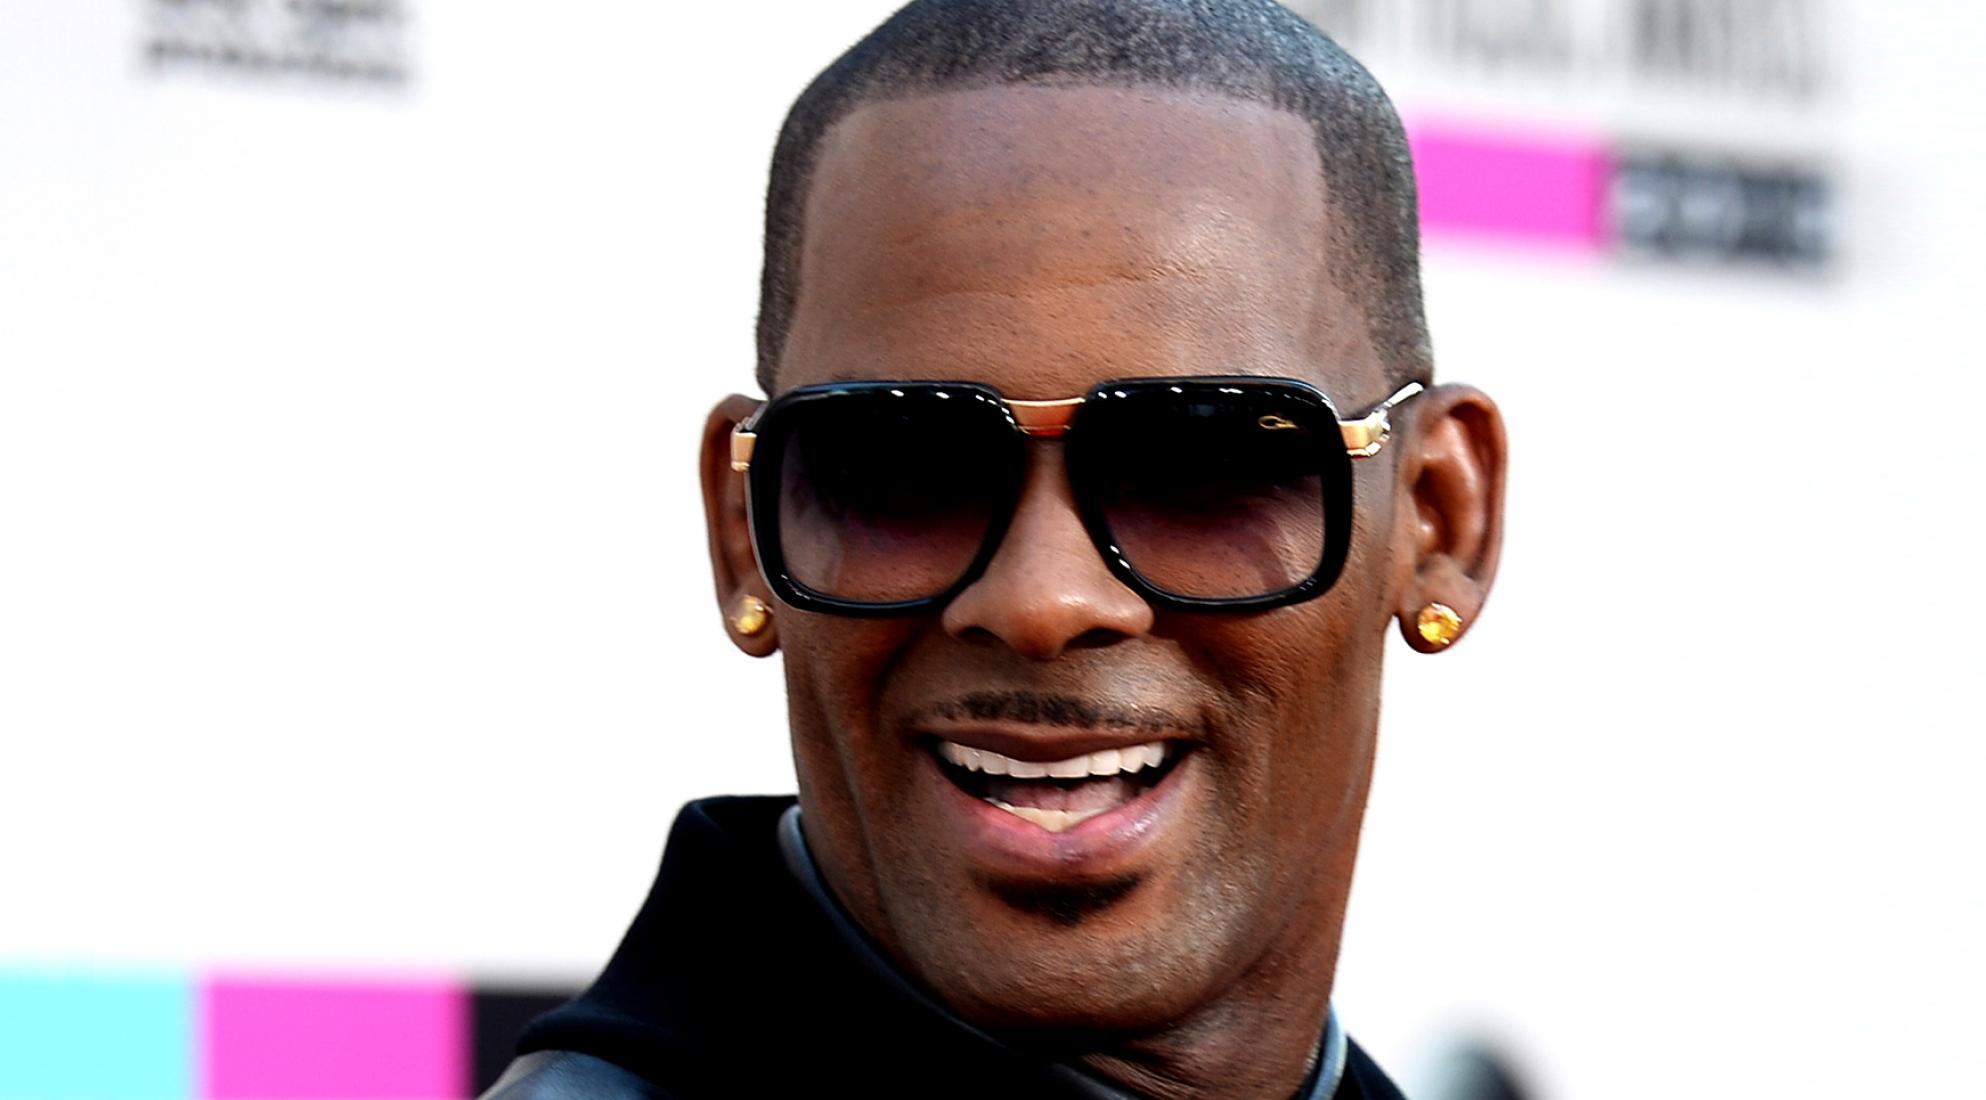 R. Kelly pictured at The Grammys | Grammy.com